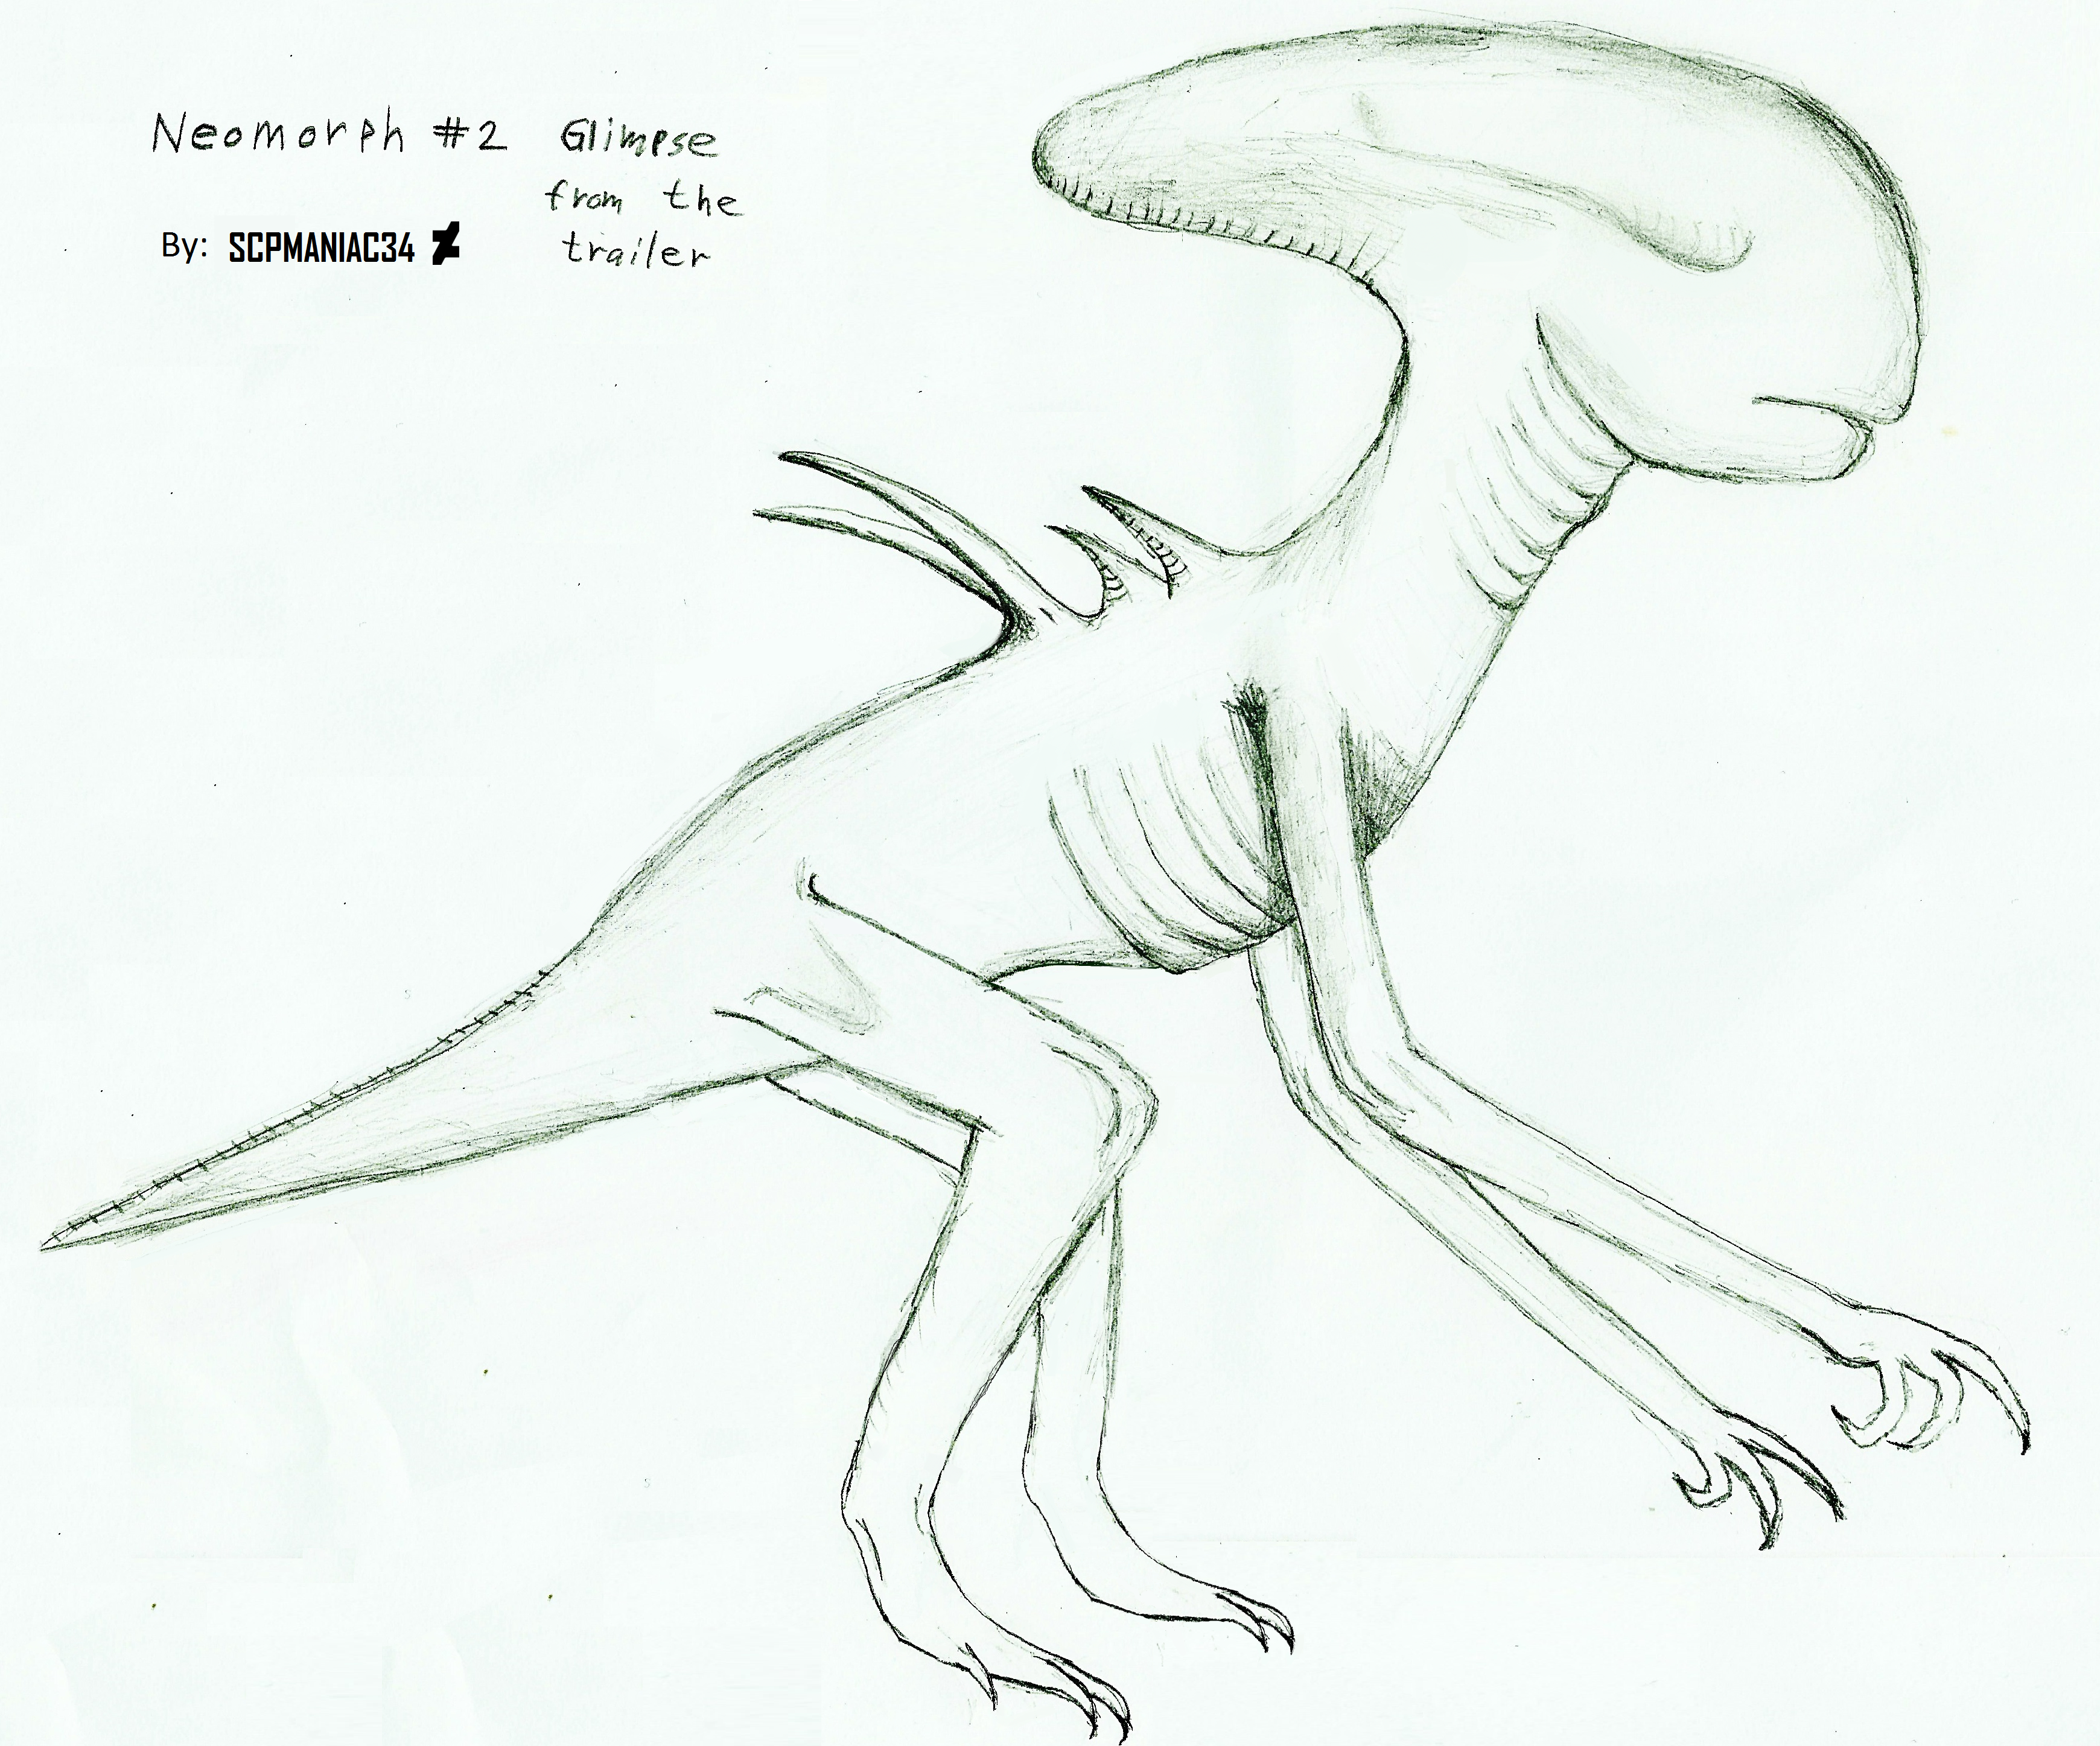 Sketch of Neomorph from the trailer